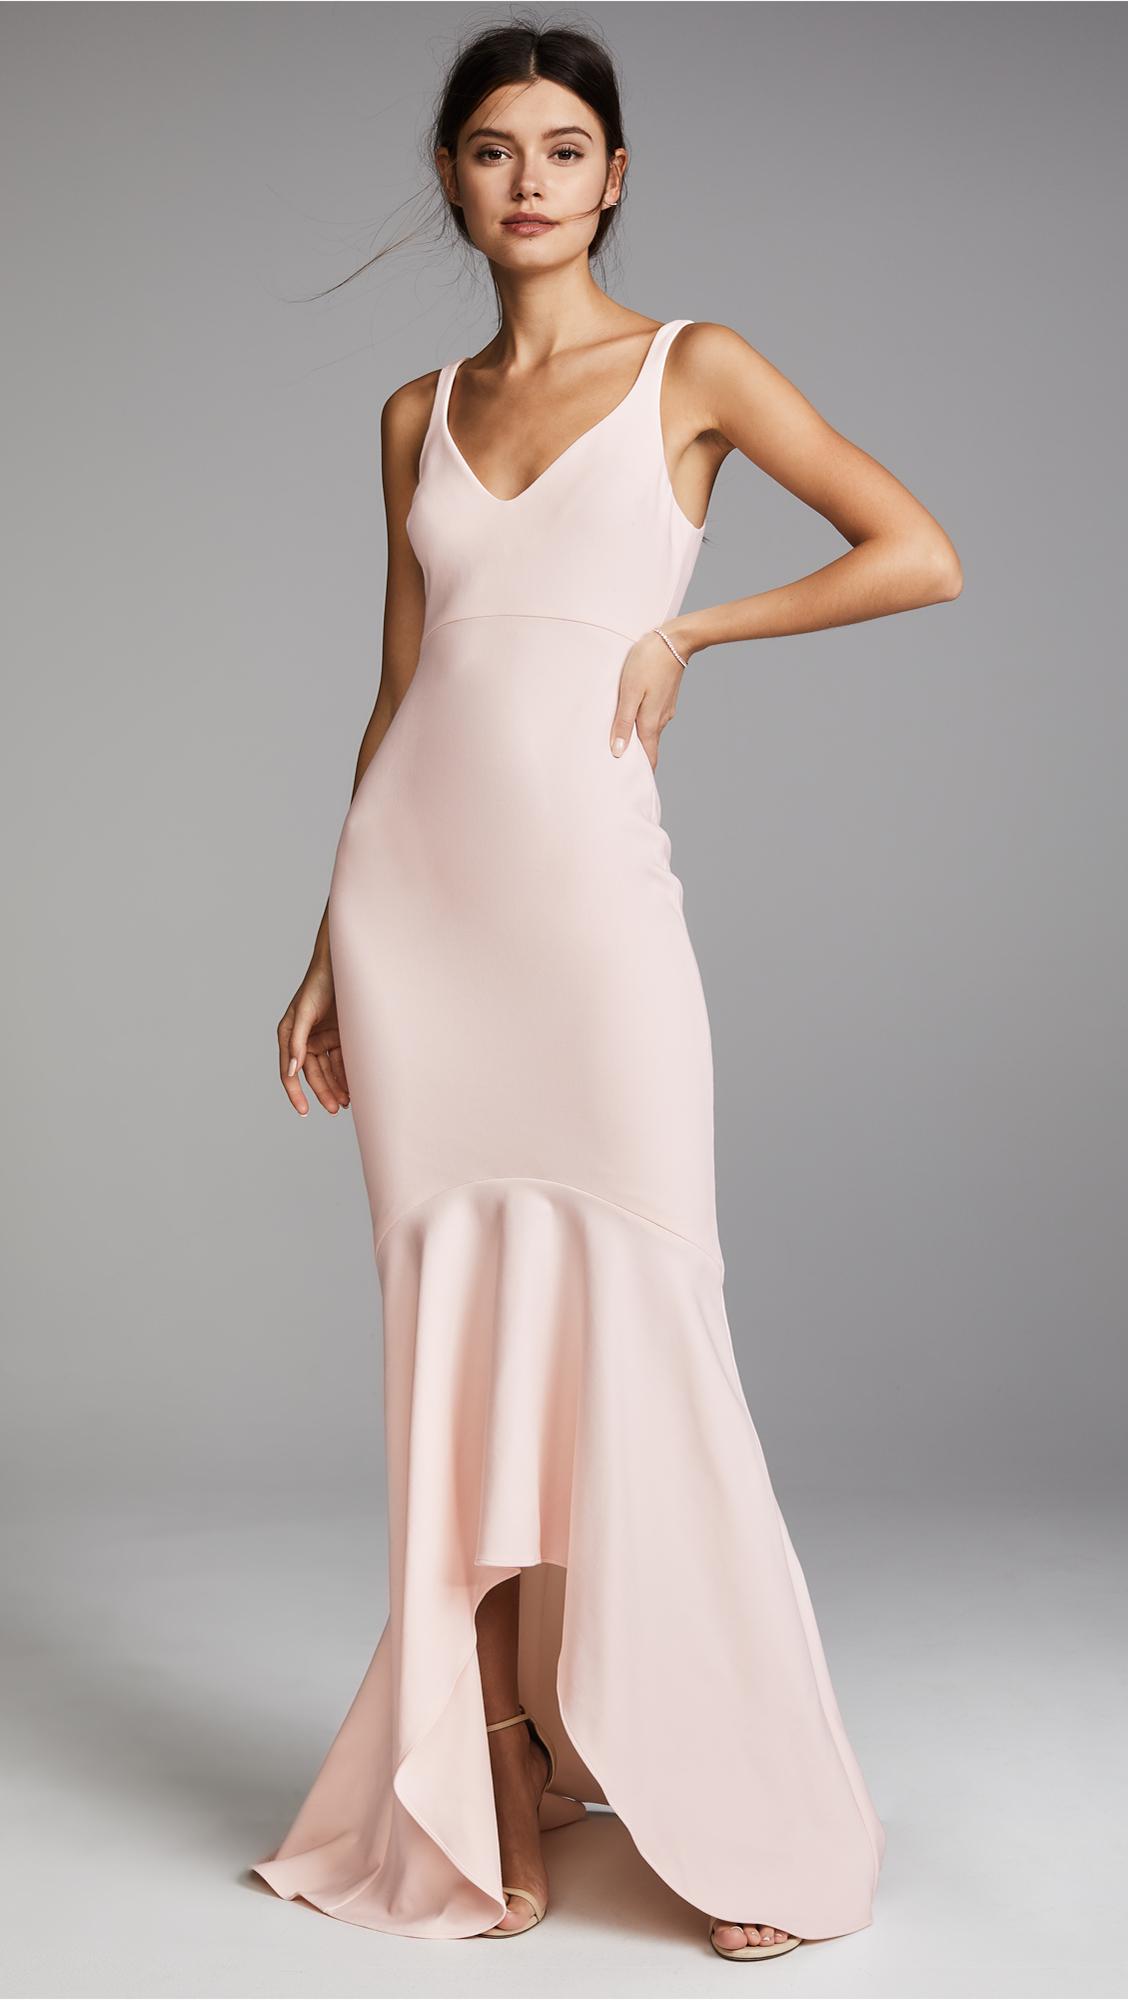 Lyst - Cinq à sept Sade Gown in Pink